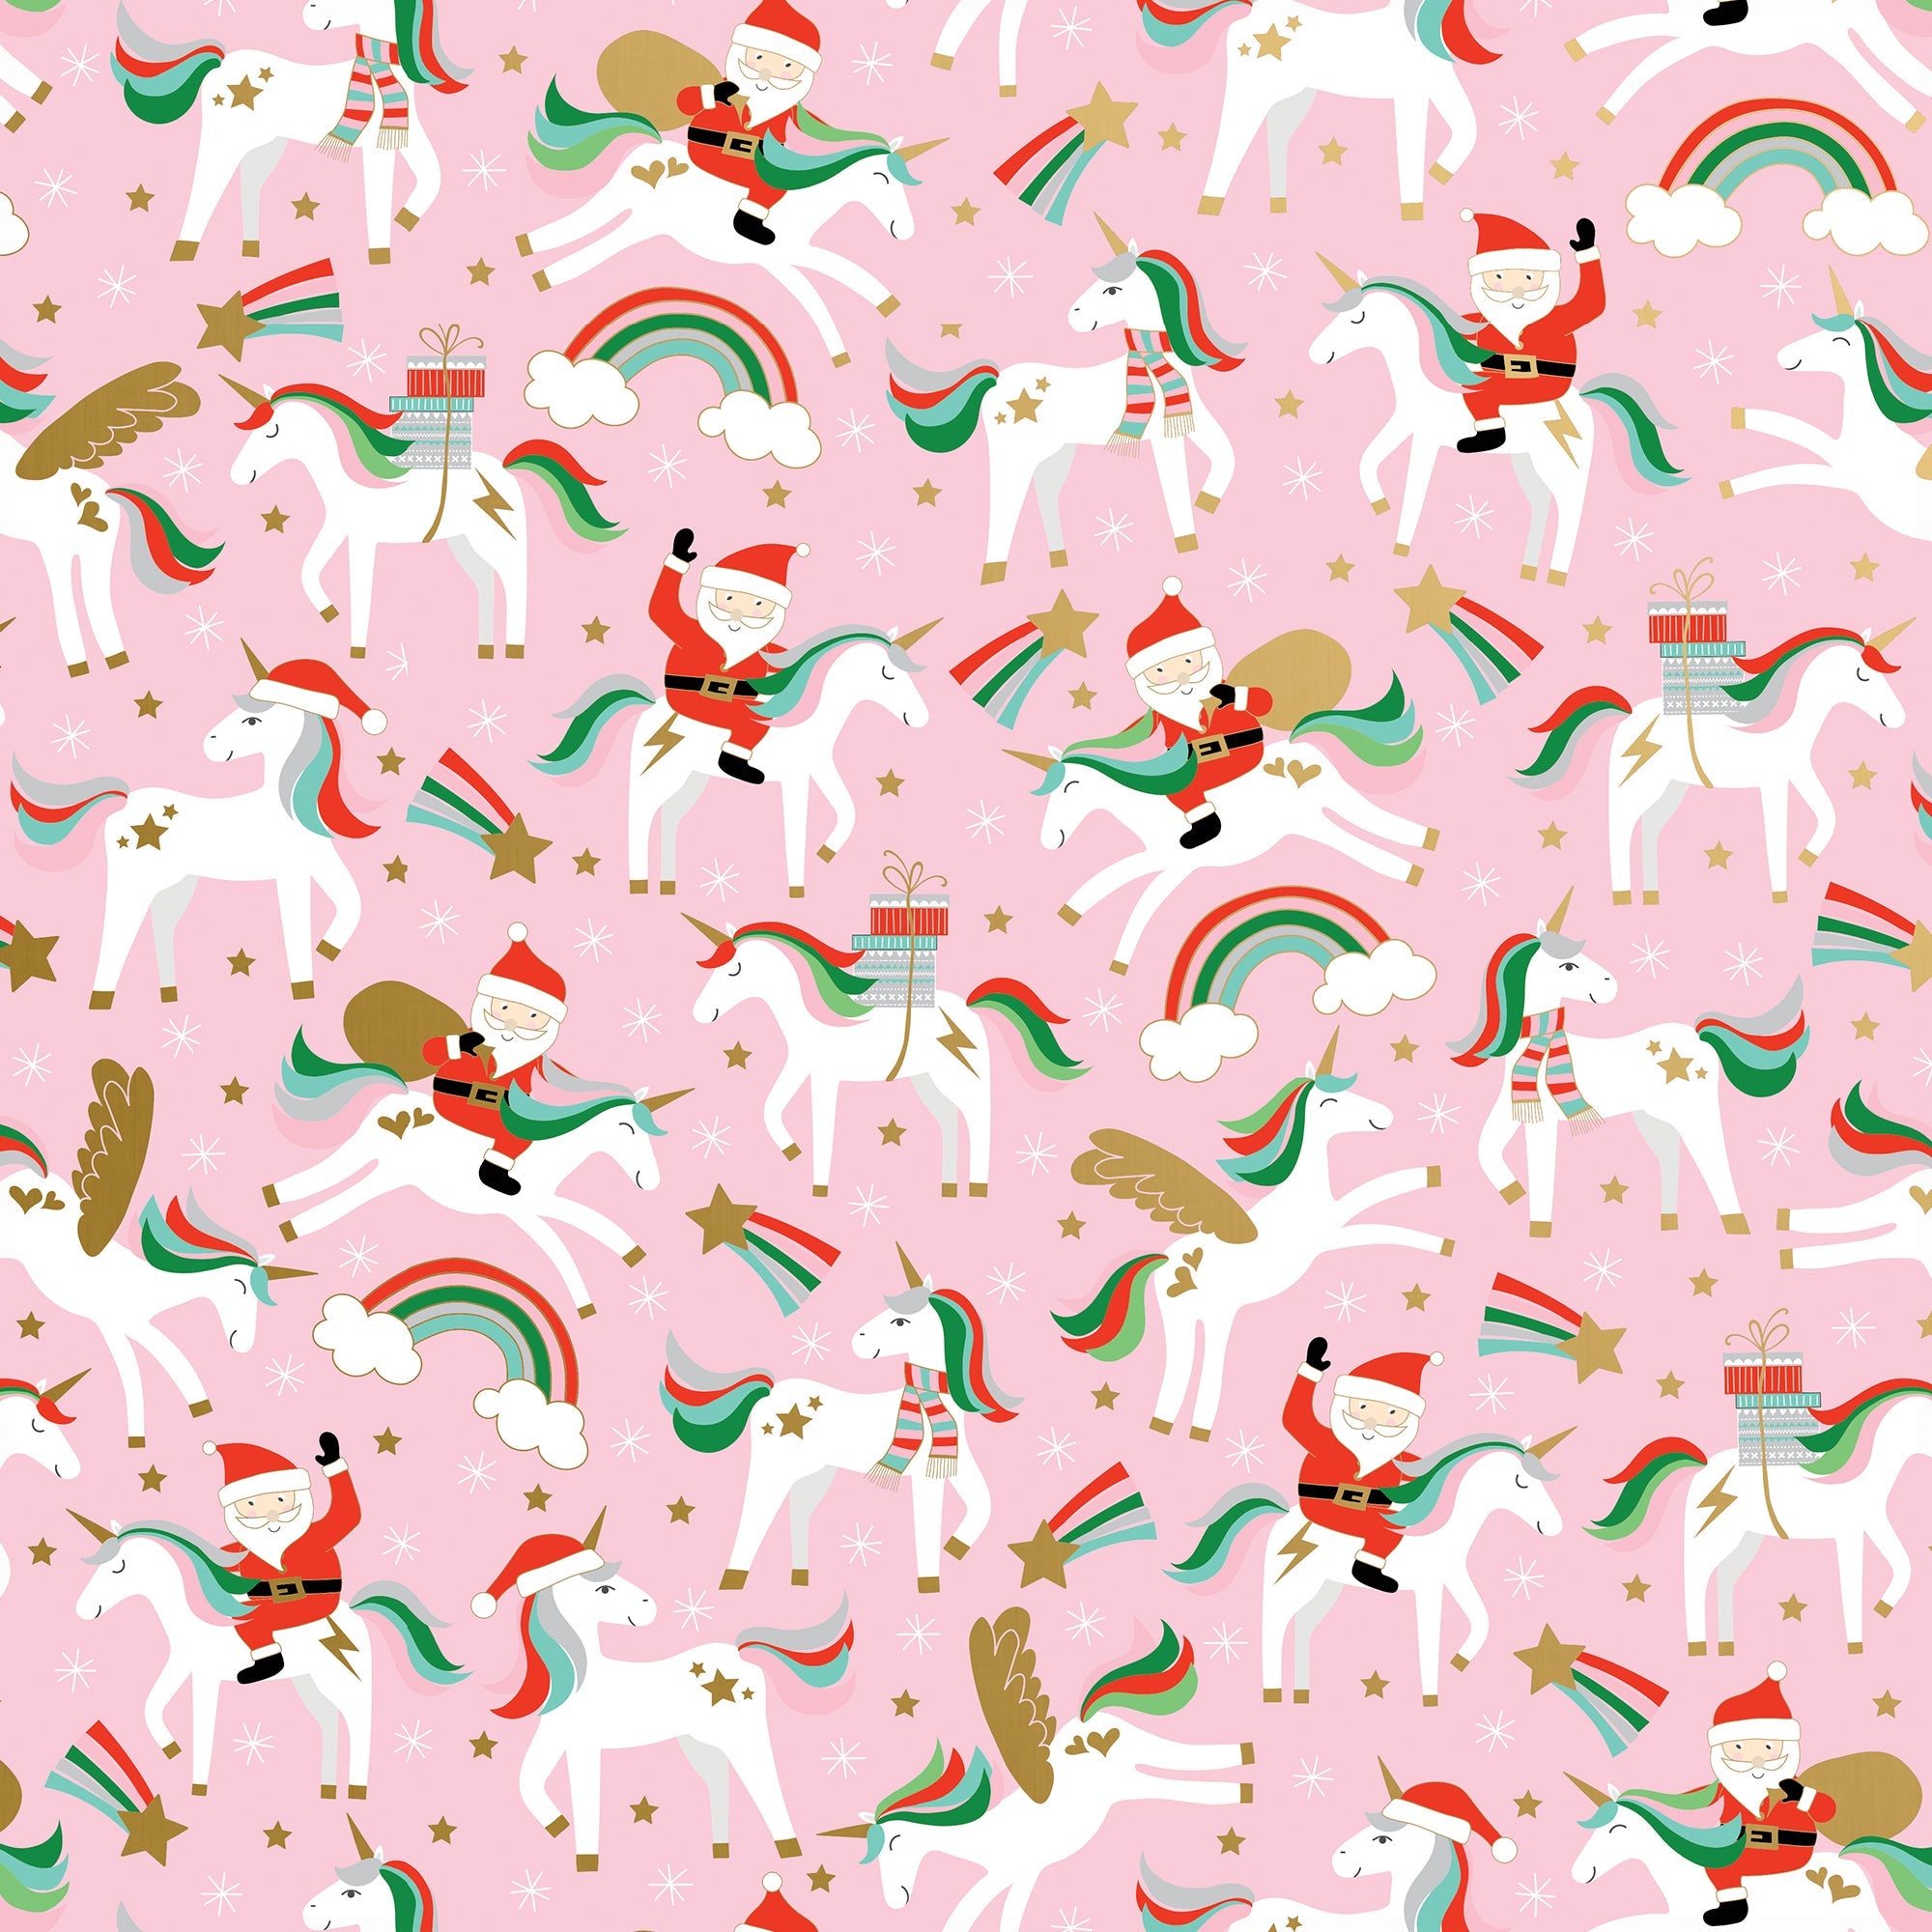 Birthday Wrapping Paper 4 Pack 100 sq.ft. Total Dinosaur